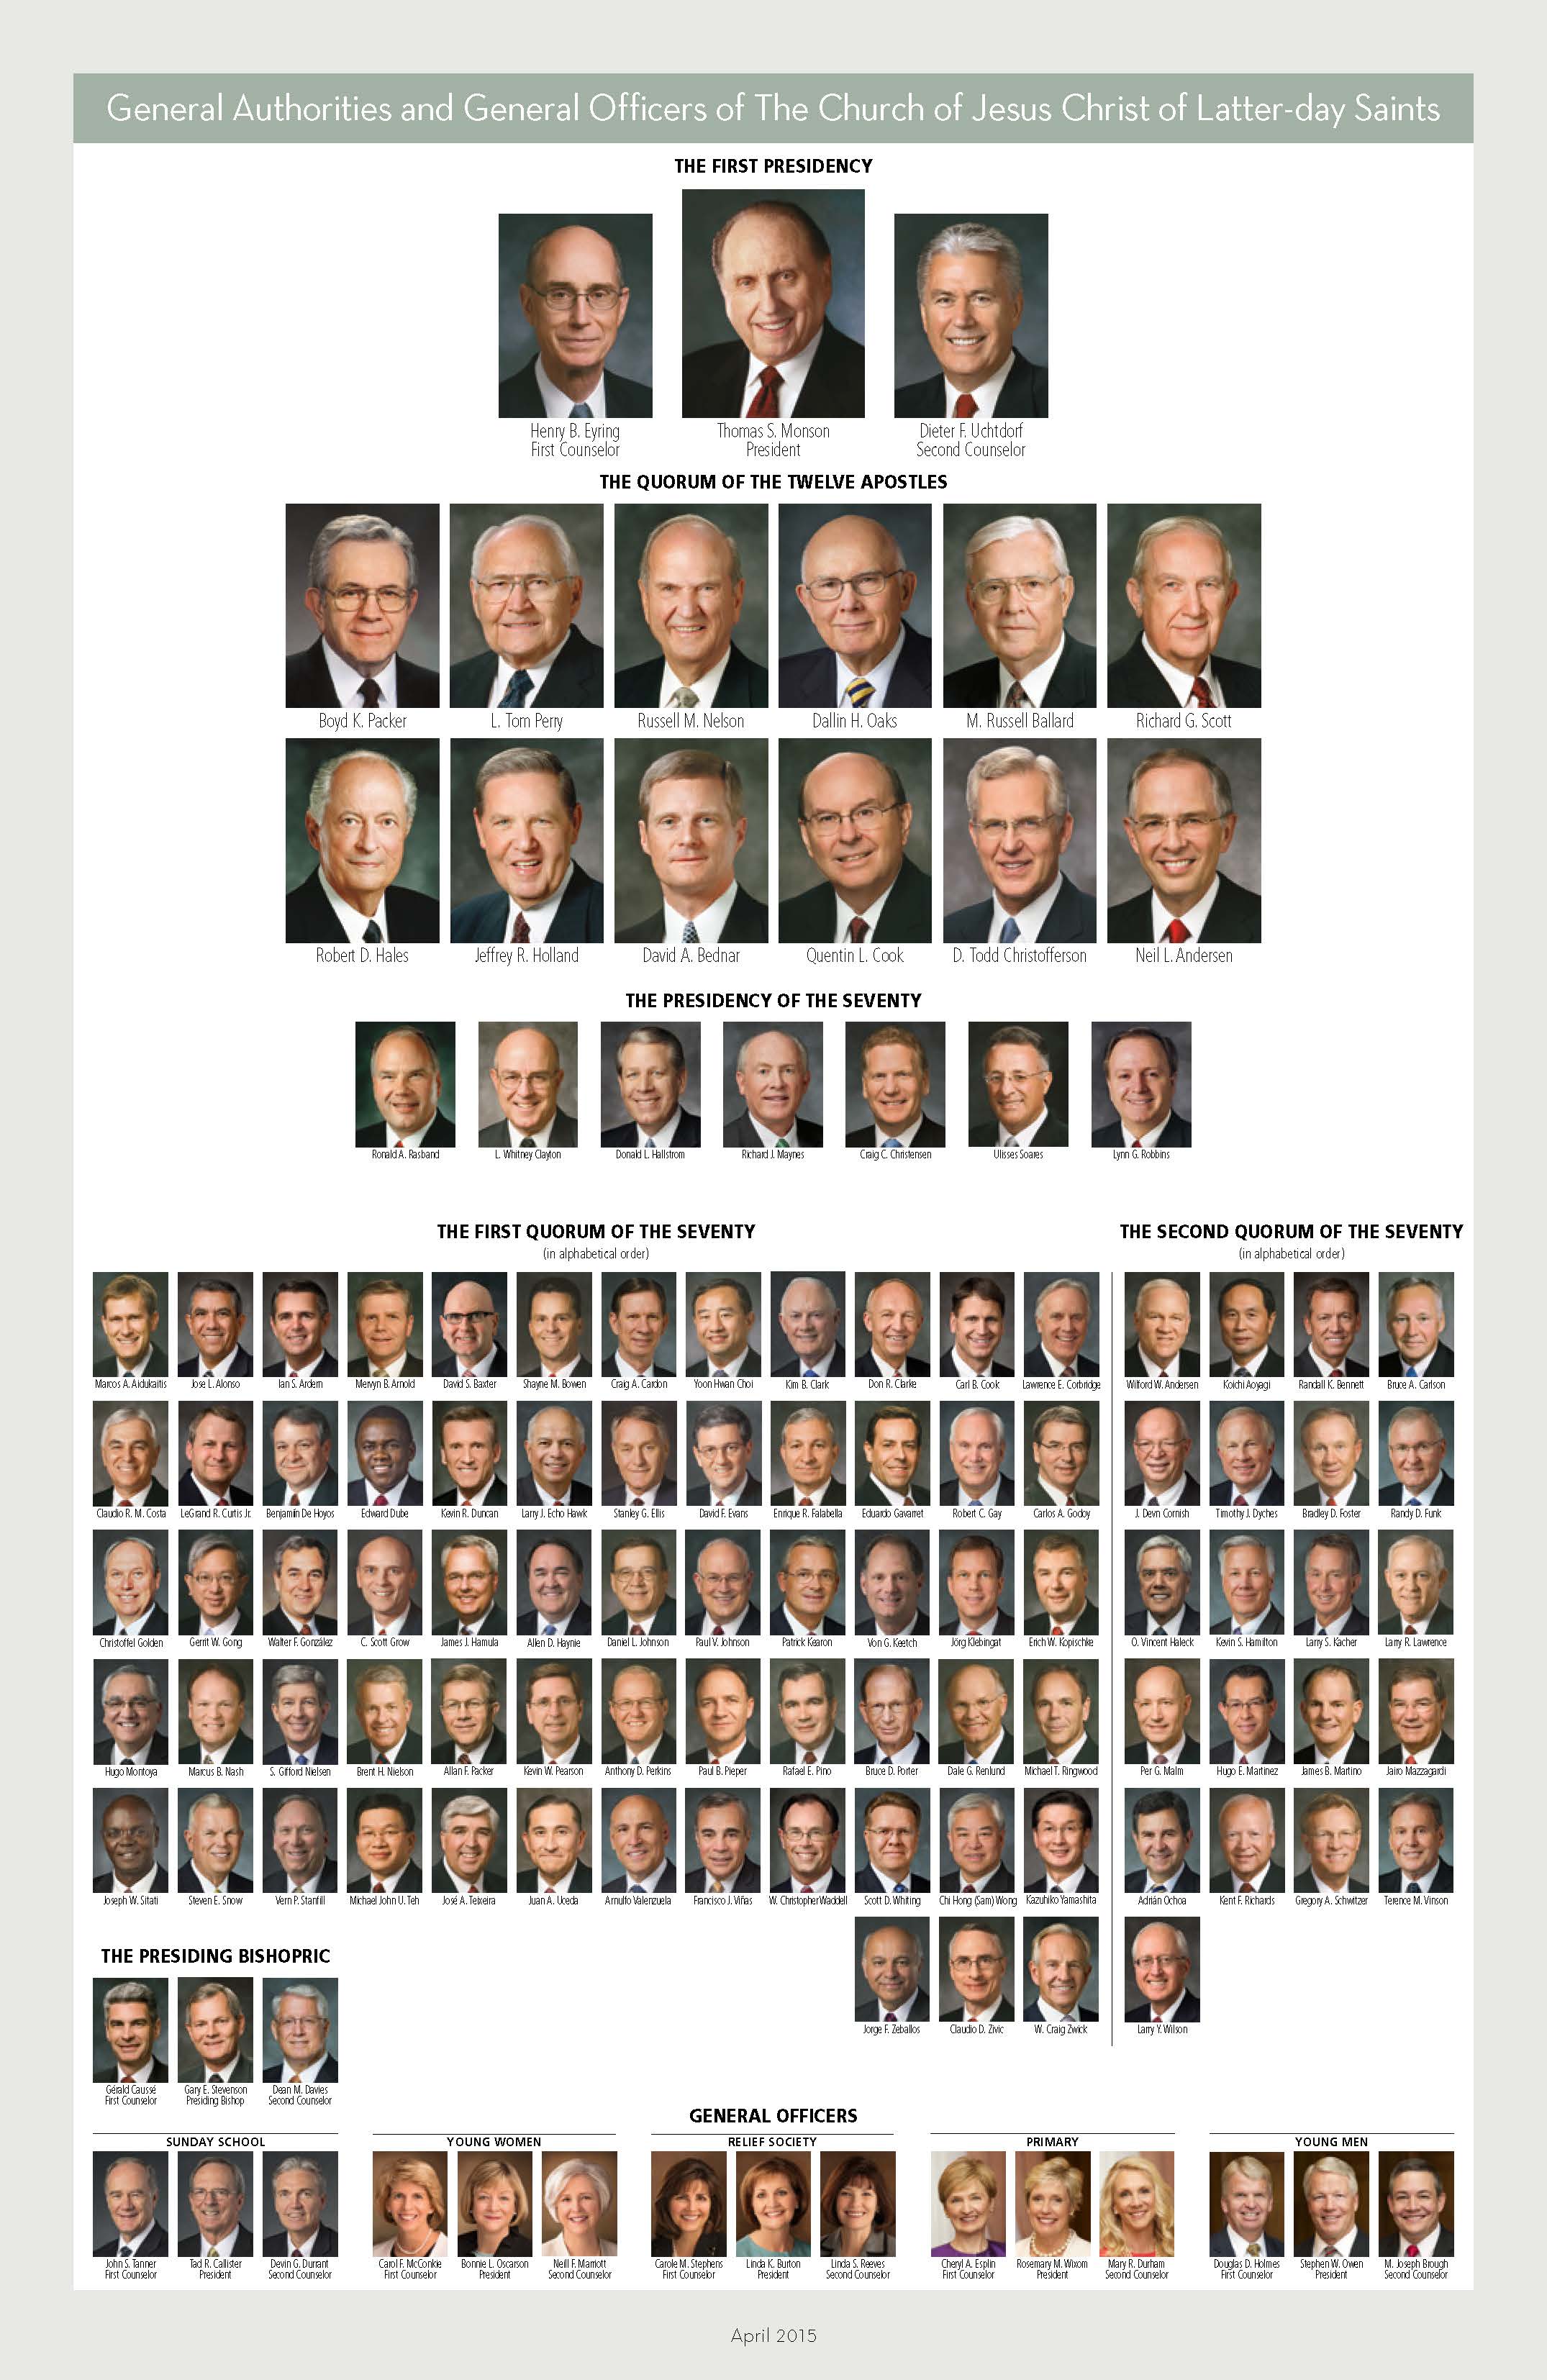 Lds-general-authorities-officers-may-2015.jpg